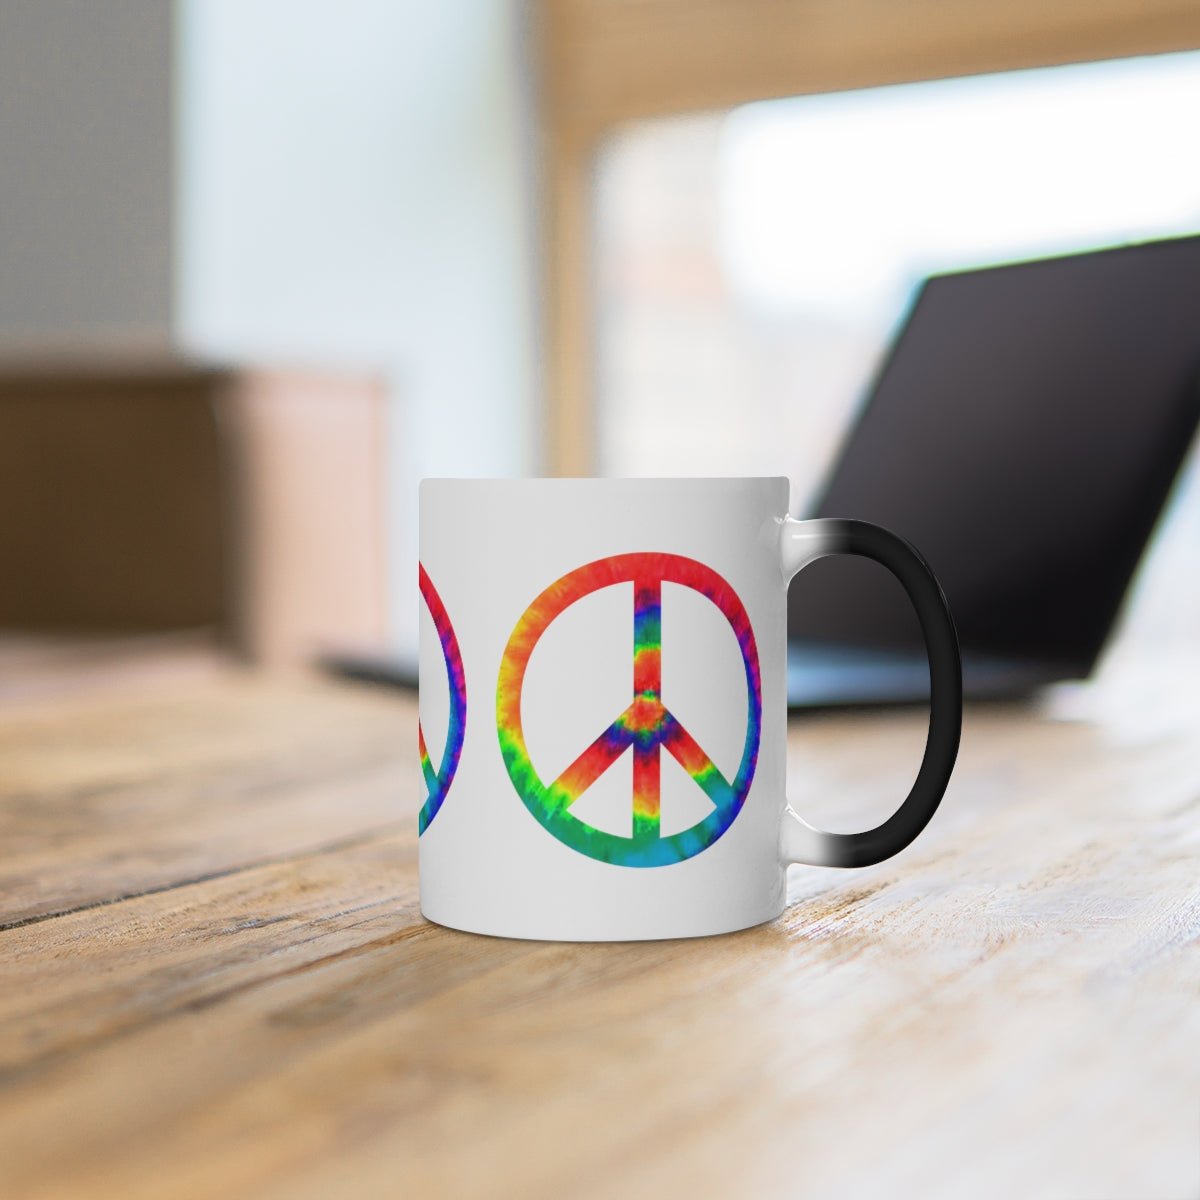 Groovy! From Solid Black To Multicolor Peace Sign When Filled, A Color Changing Mug